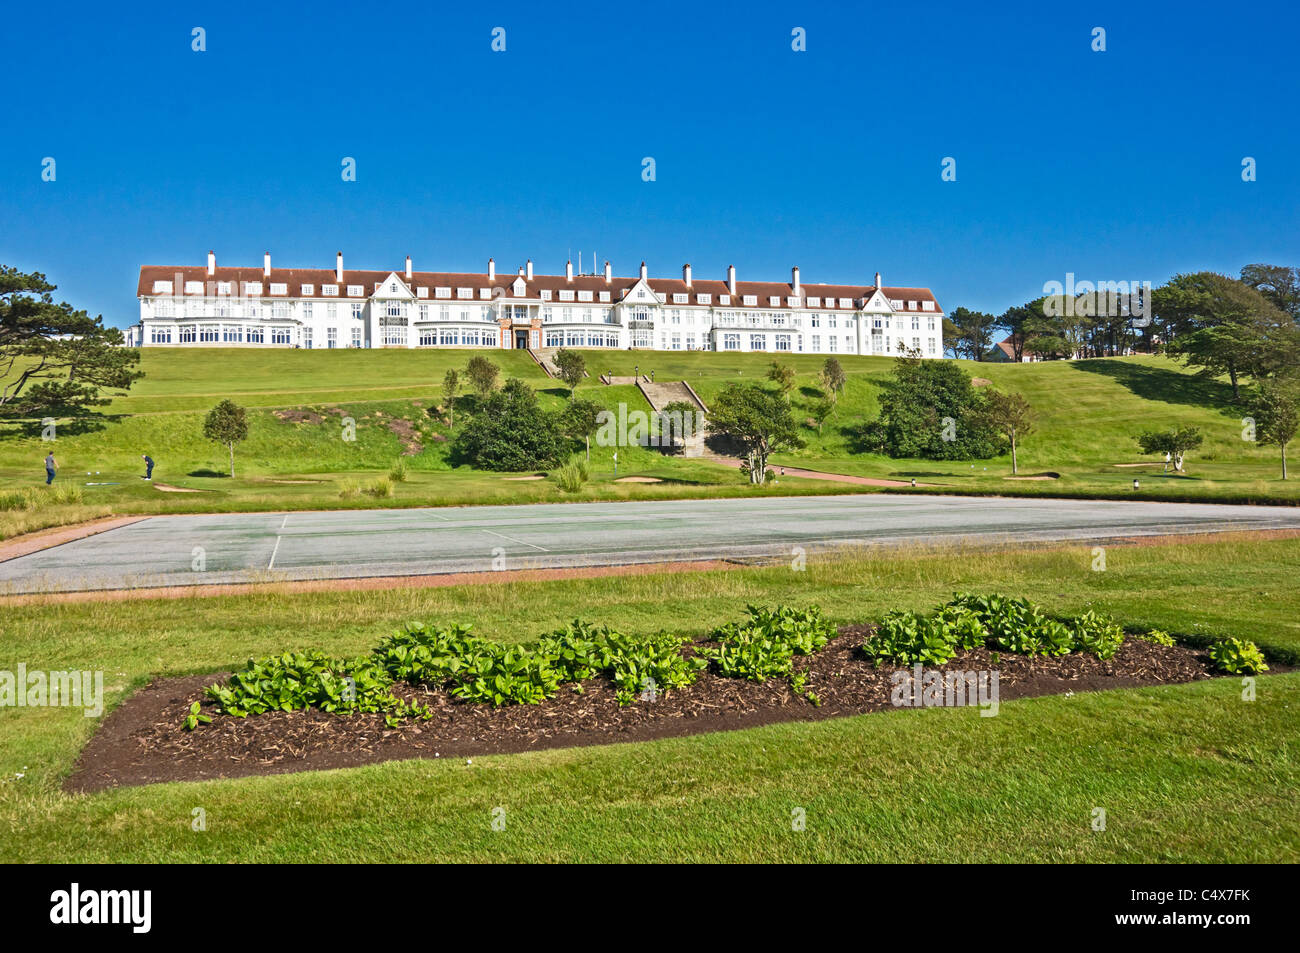 Turnberry Hotel at the Turnberry Resort in Turnberry Ayrshire Scotland